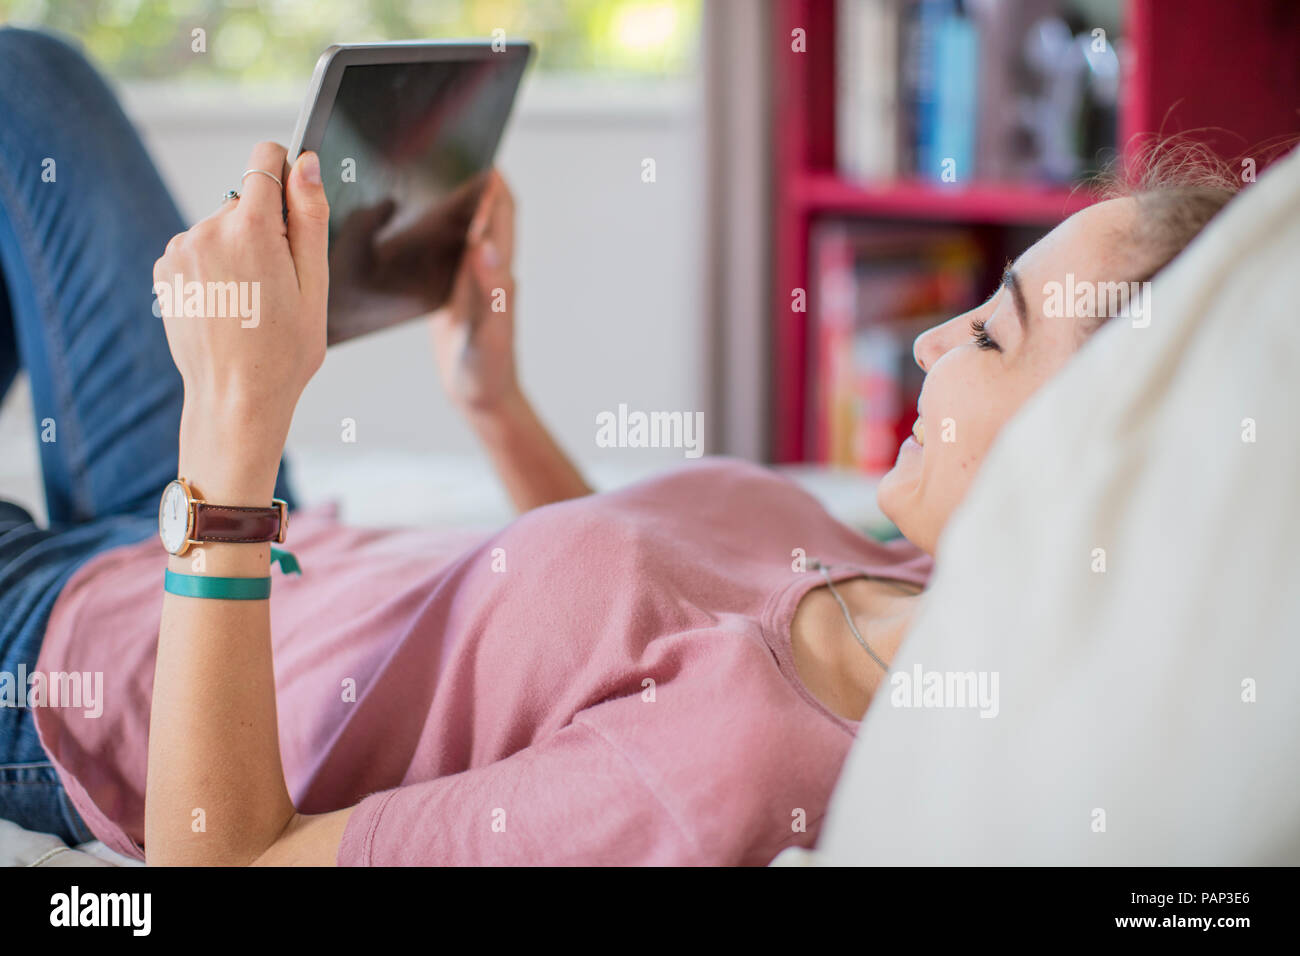 Teenage girl lying on bed looking at tablet Stock Photo